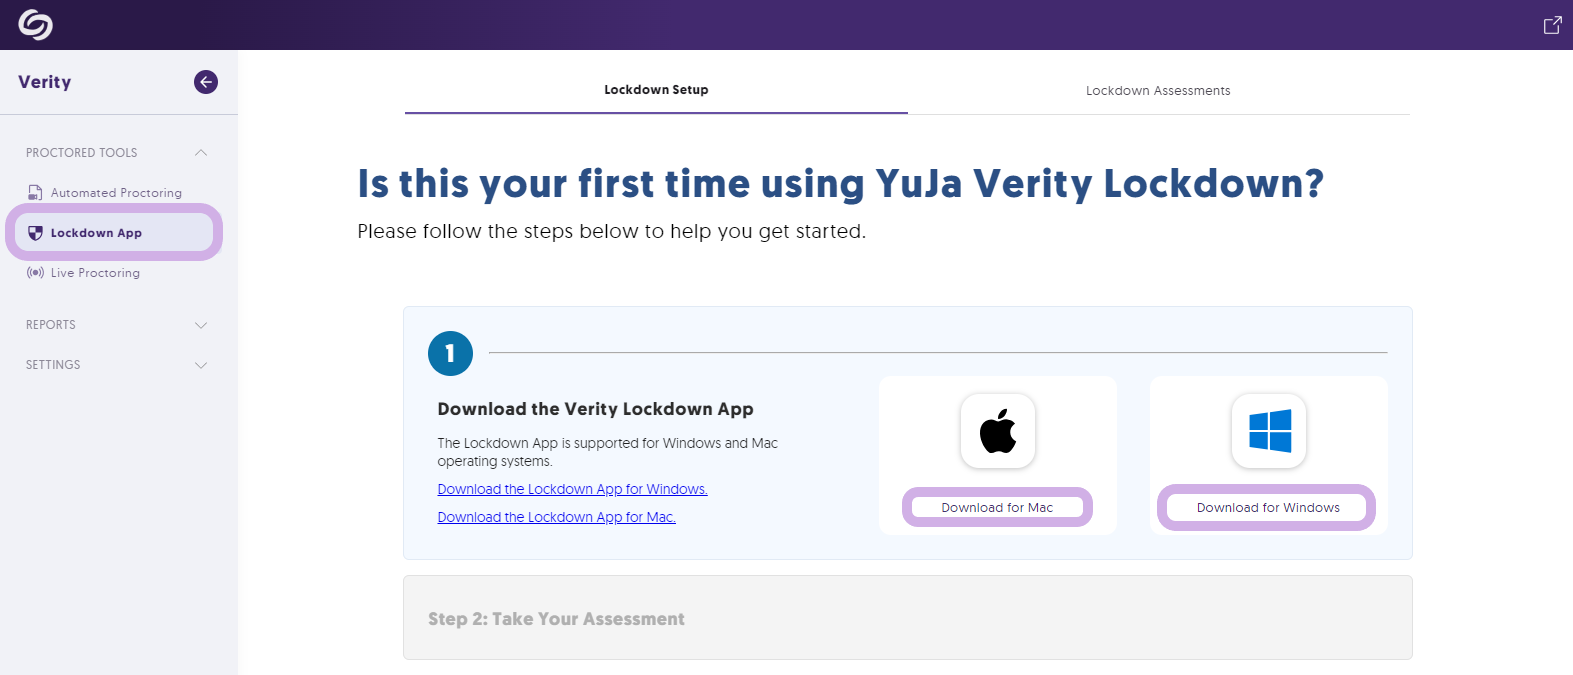 The Lockdown App page for the Verity LTI app with options to download for Mac or Windows.